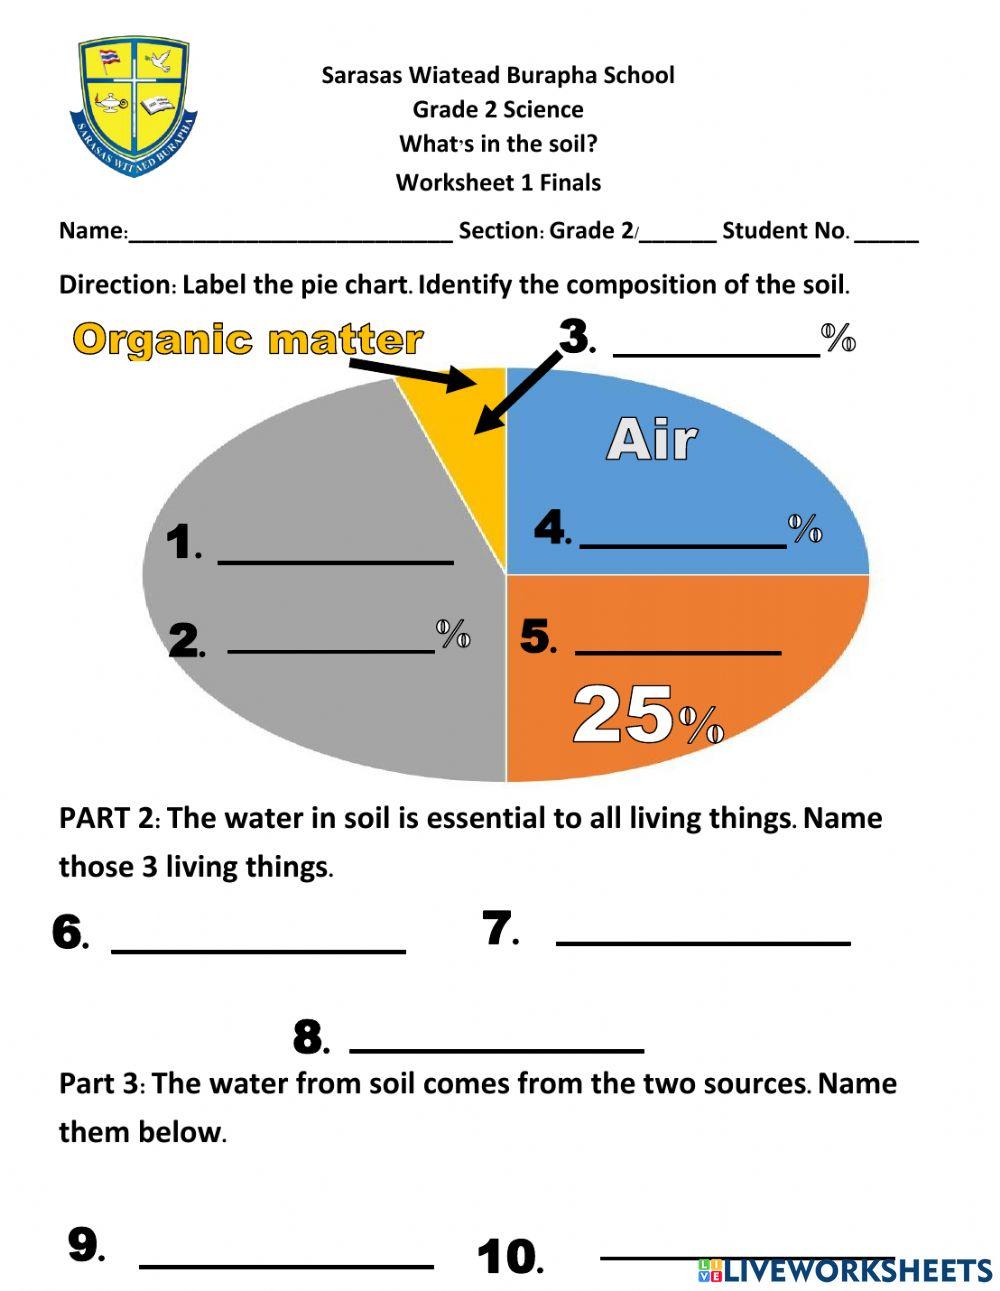 Worksheet 2, what's in the soil?, water